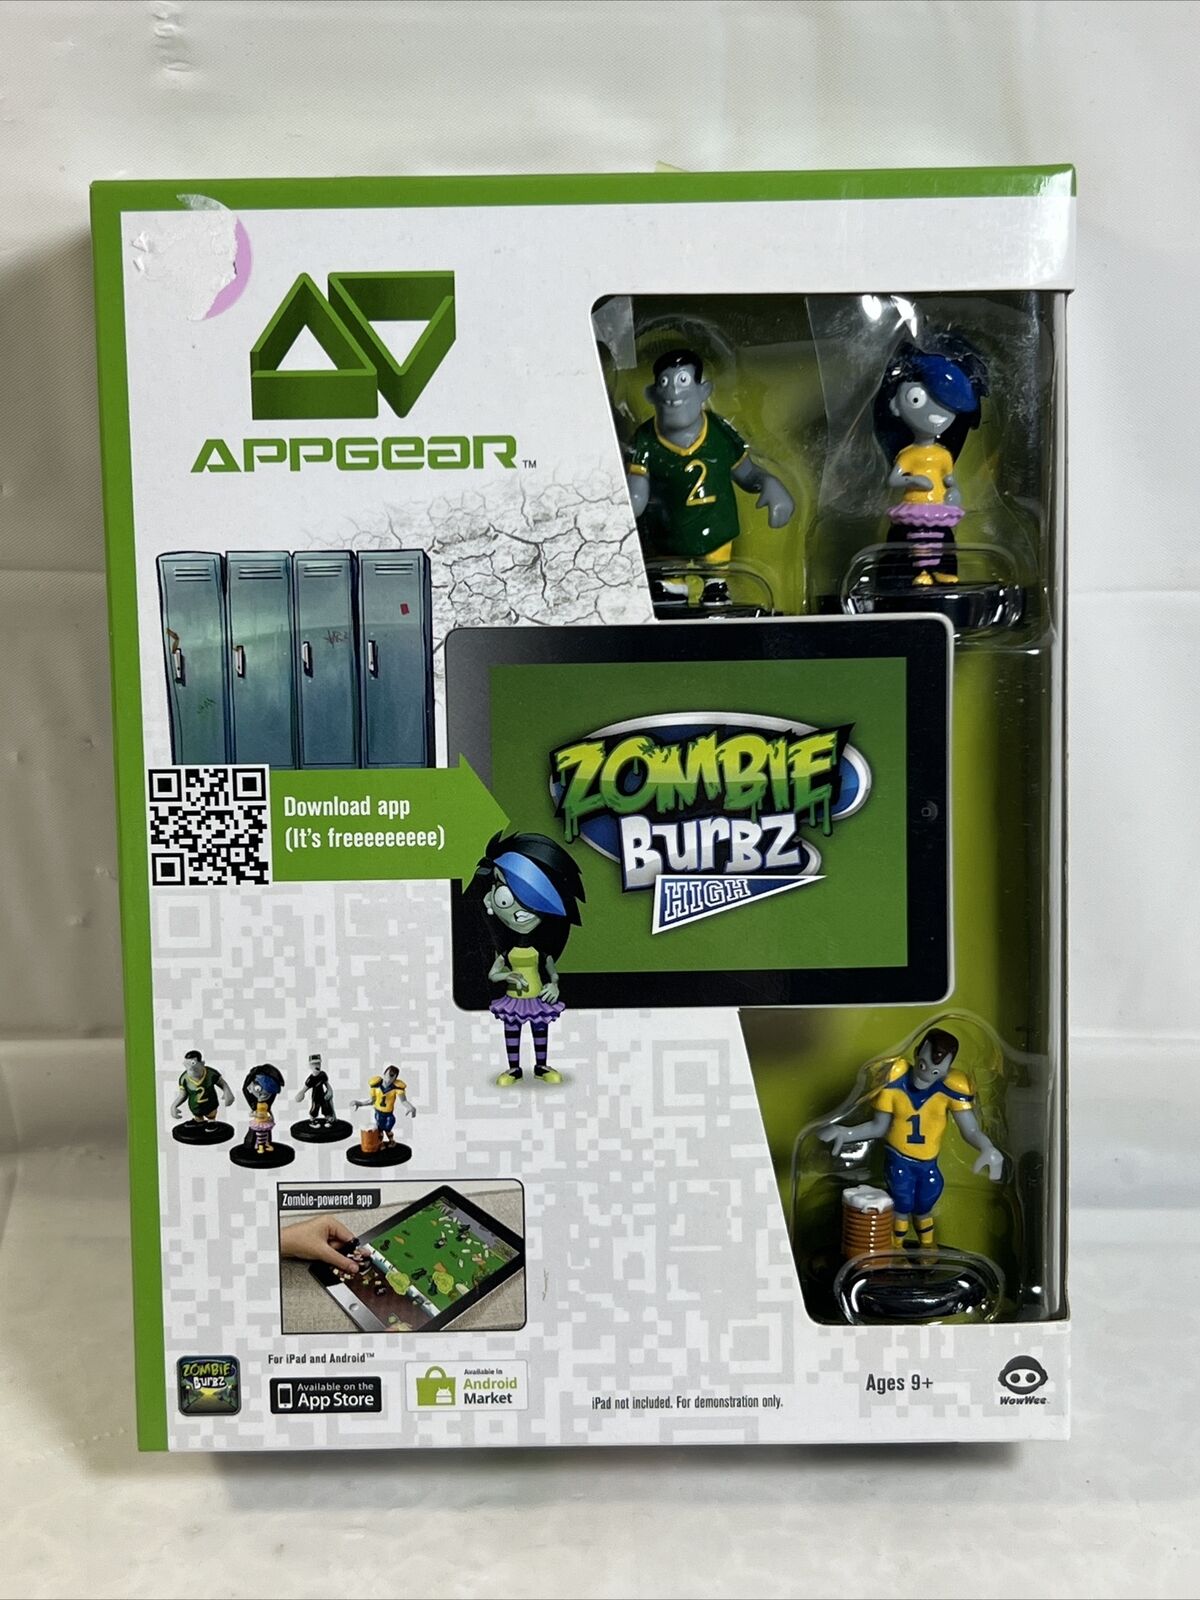 AppGear Zombie Burbz High Mobile Application Game For iPad, Android New Sealed